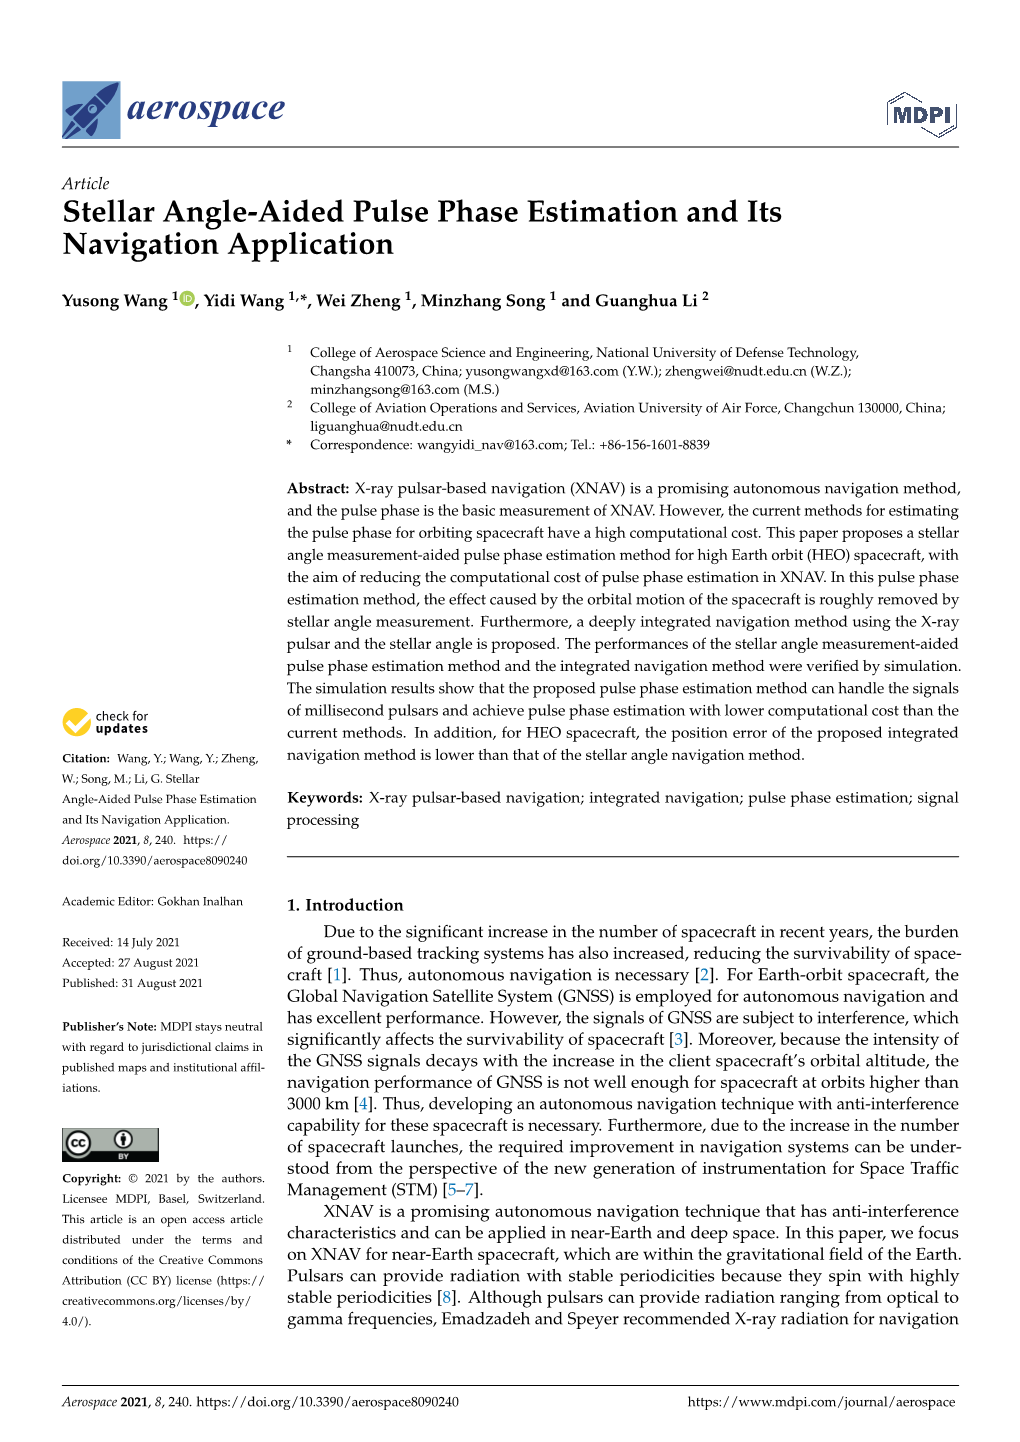 Stellar Angle-Aided Pulse Phase Estimation and Its Navigation Application